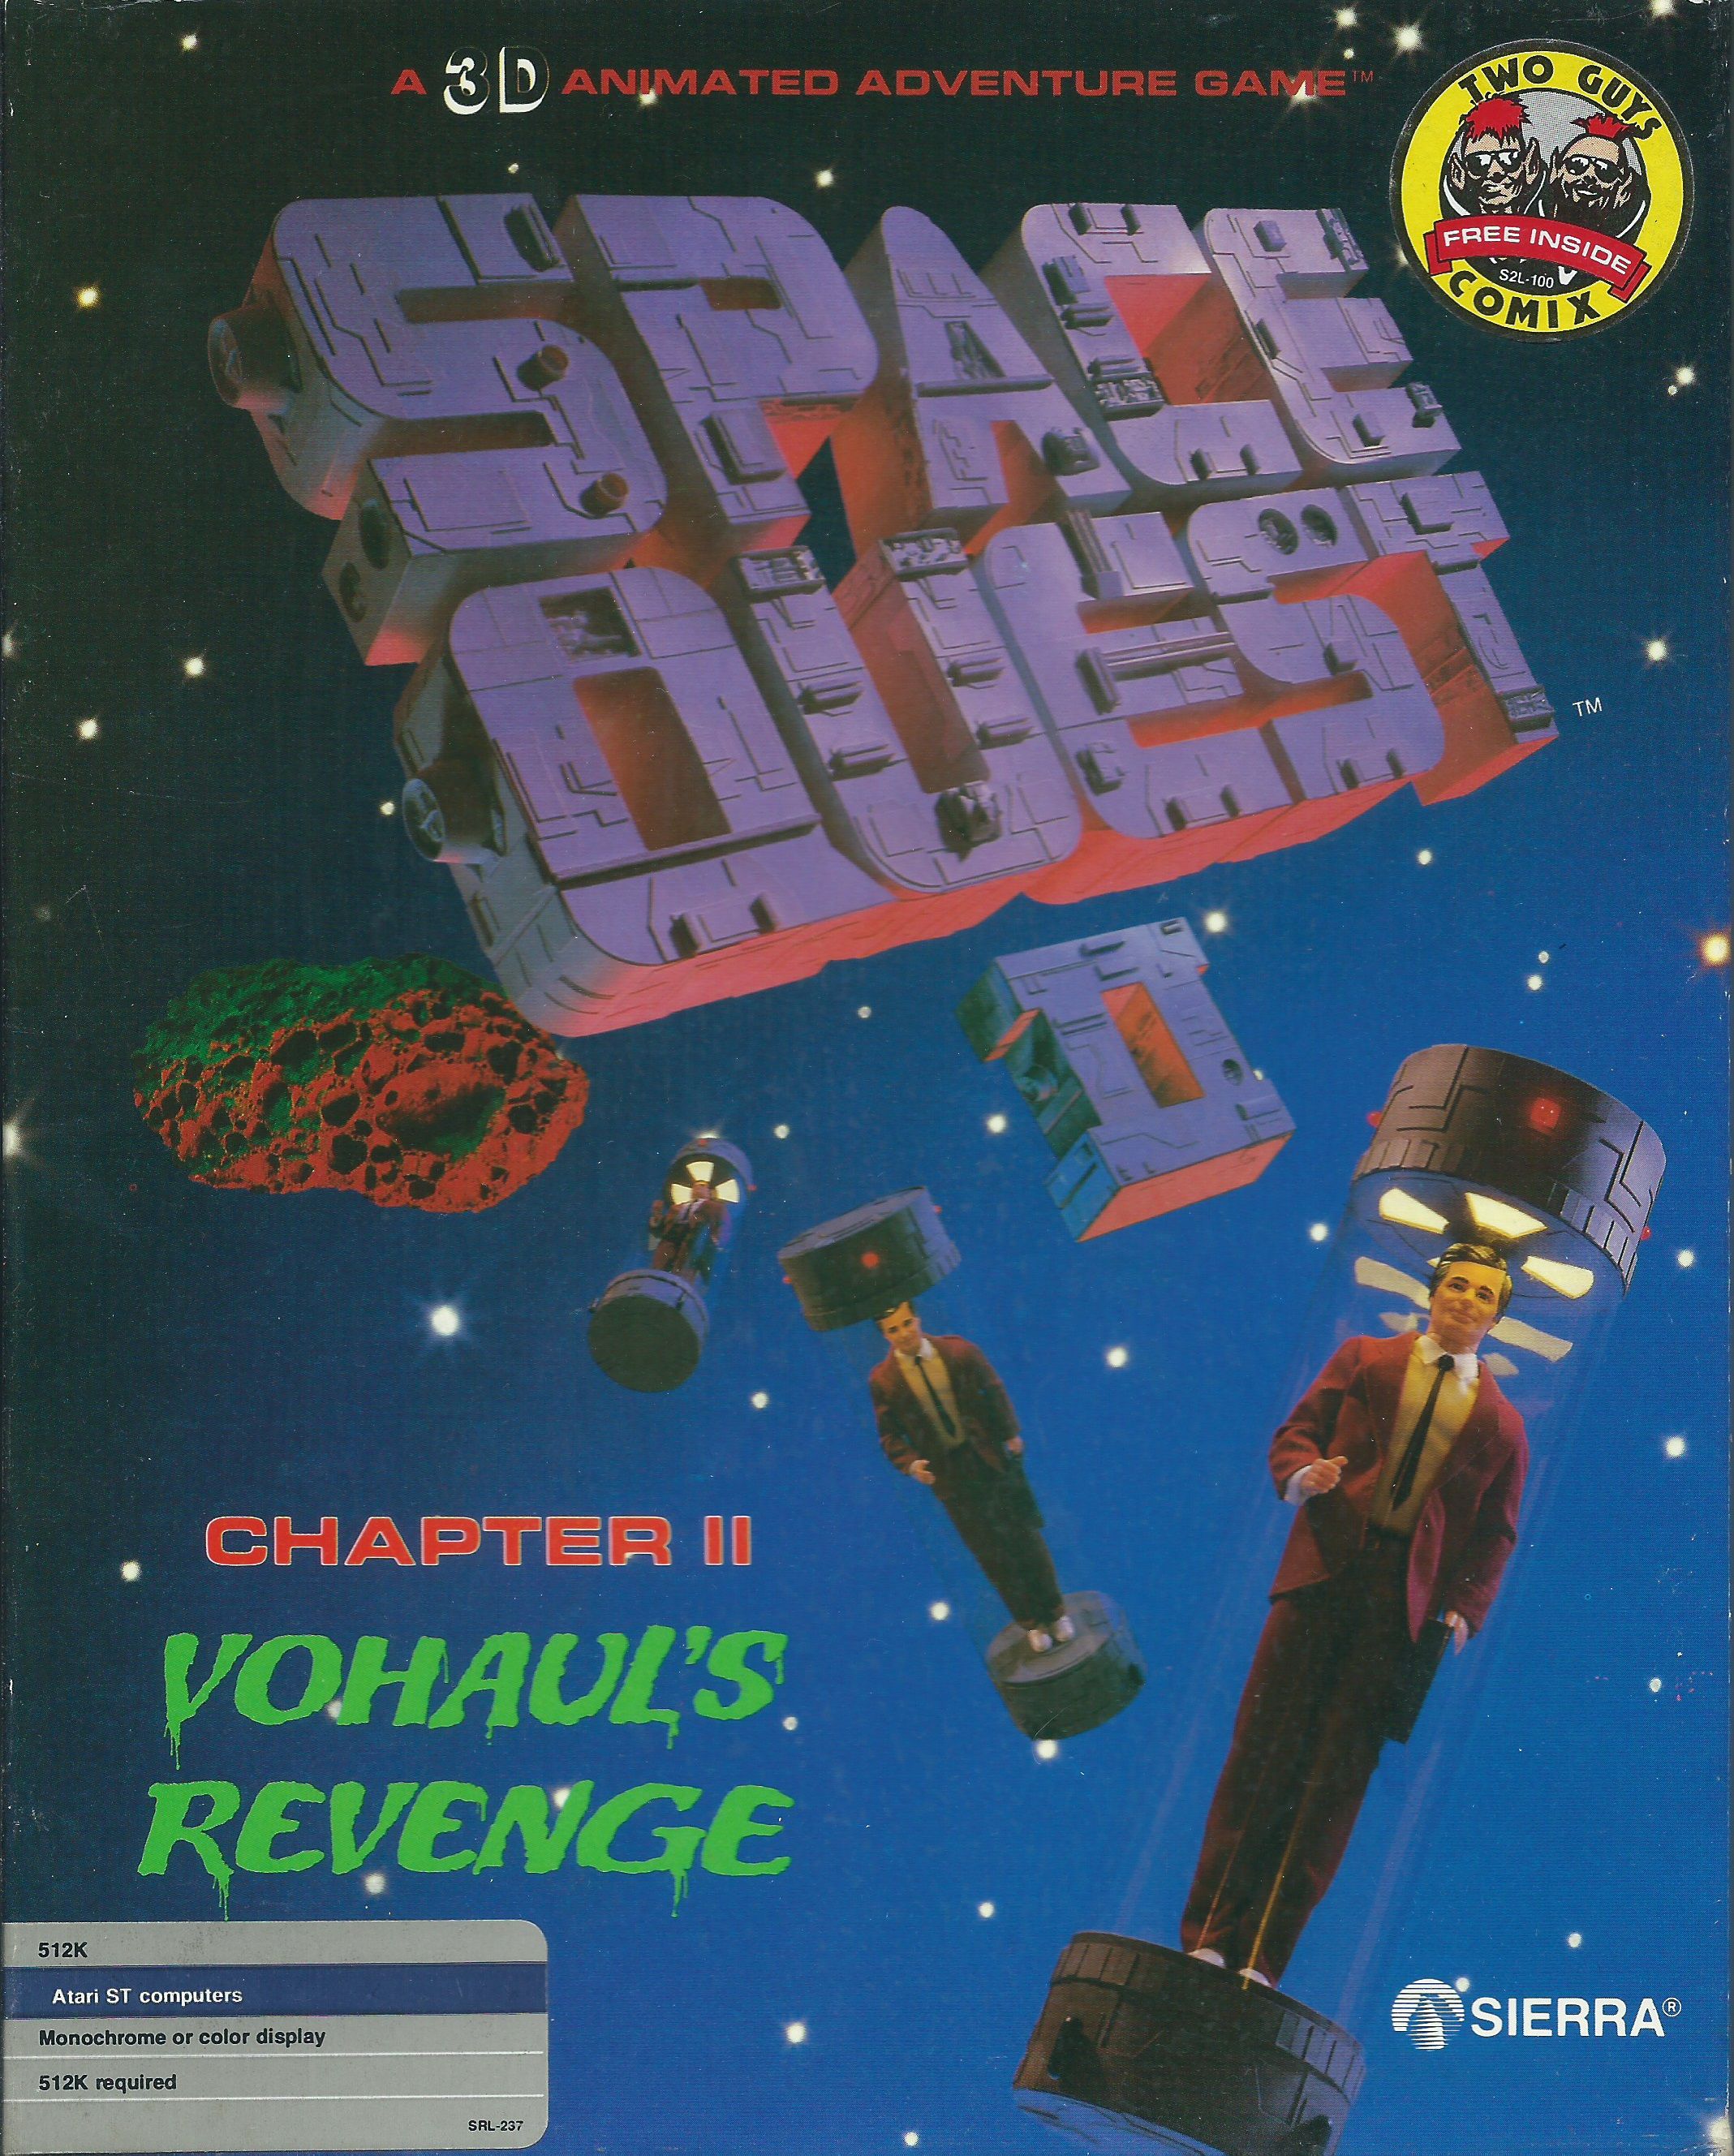 Space Quest: Chapter II - Vohaul's Revenge Video Game